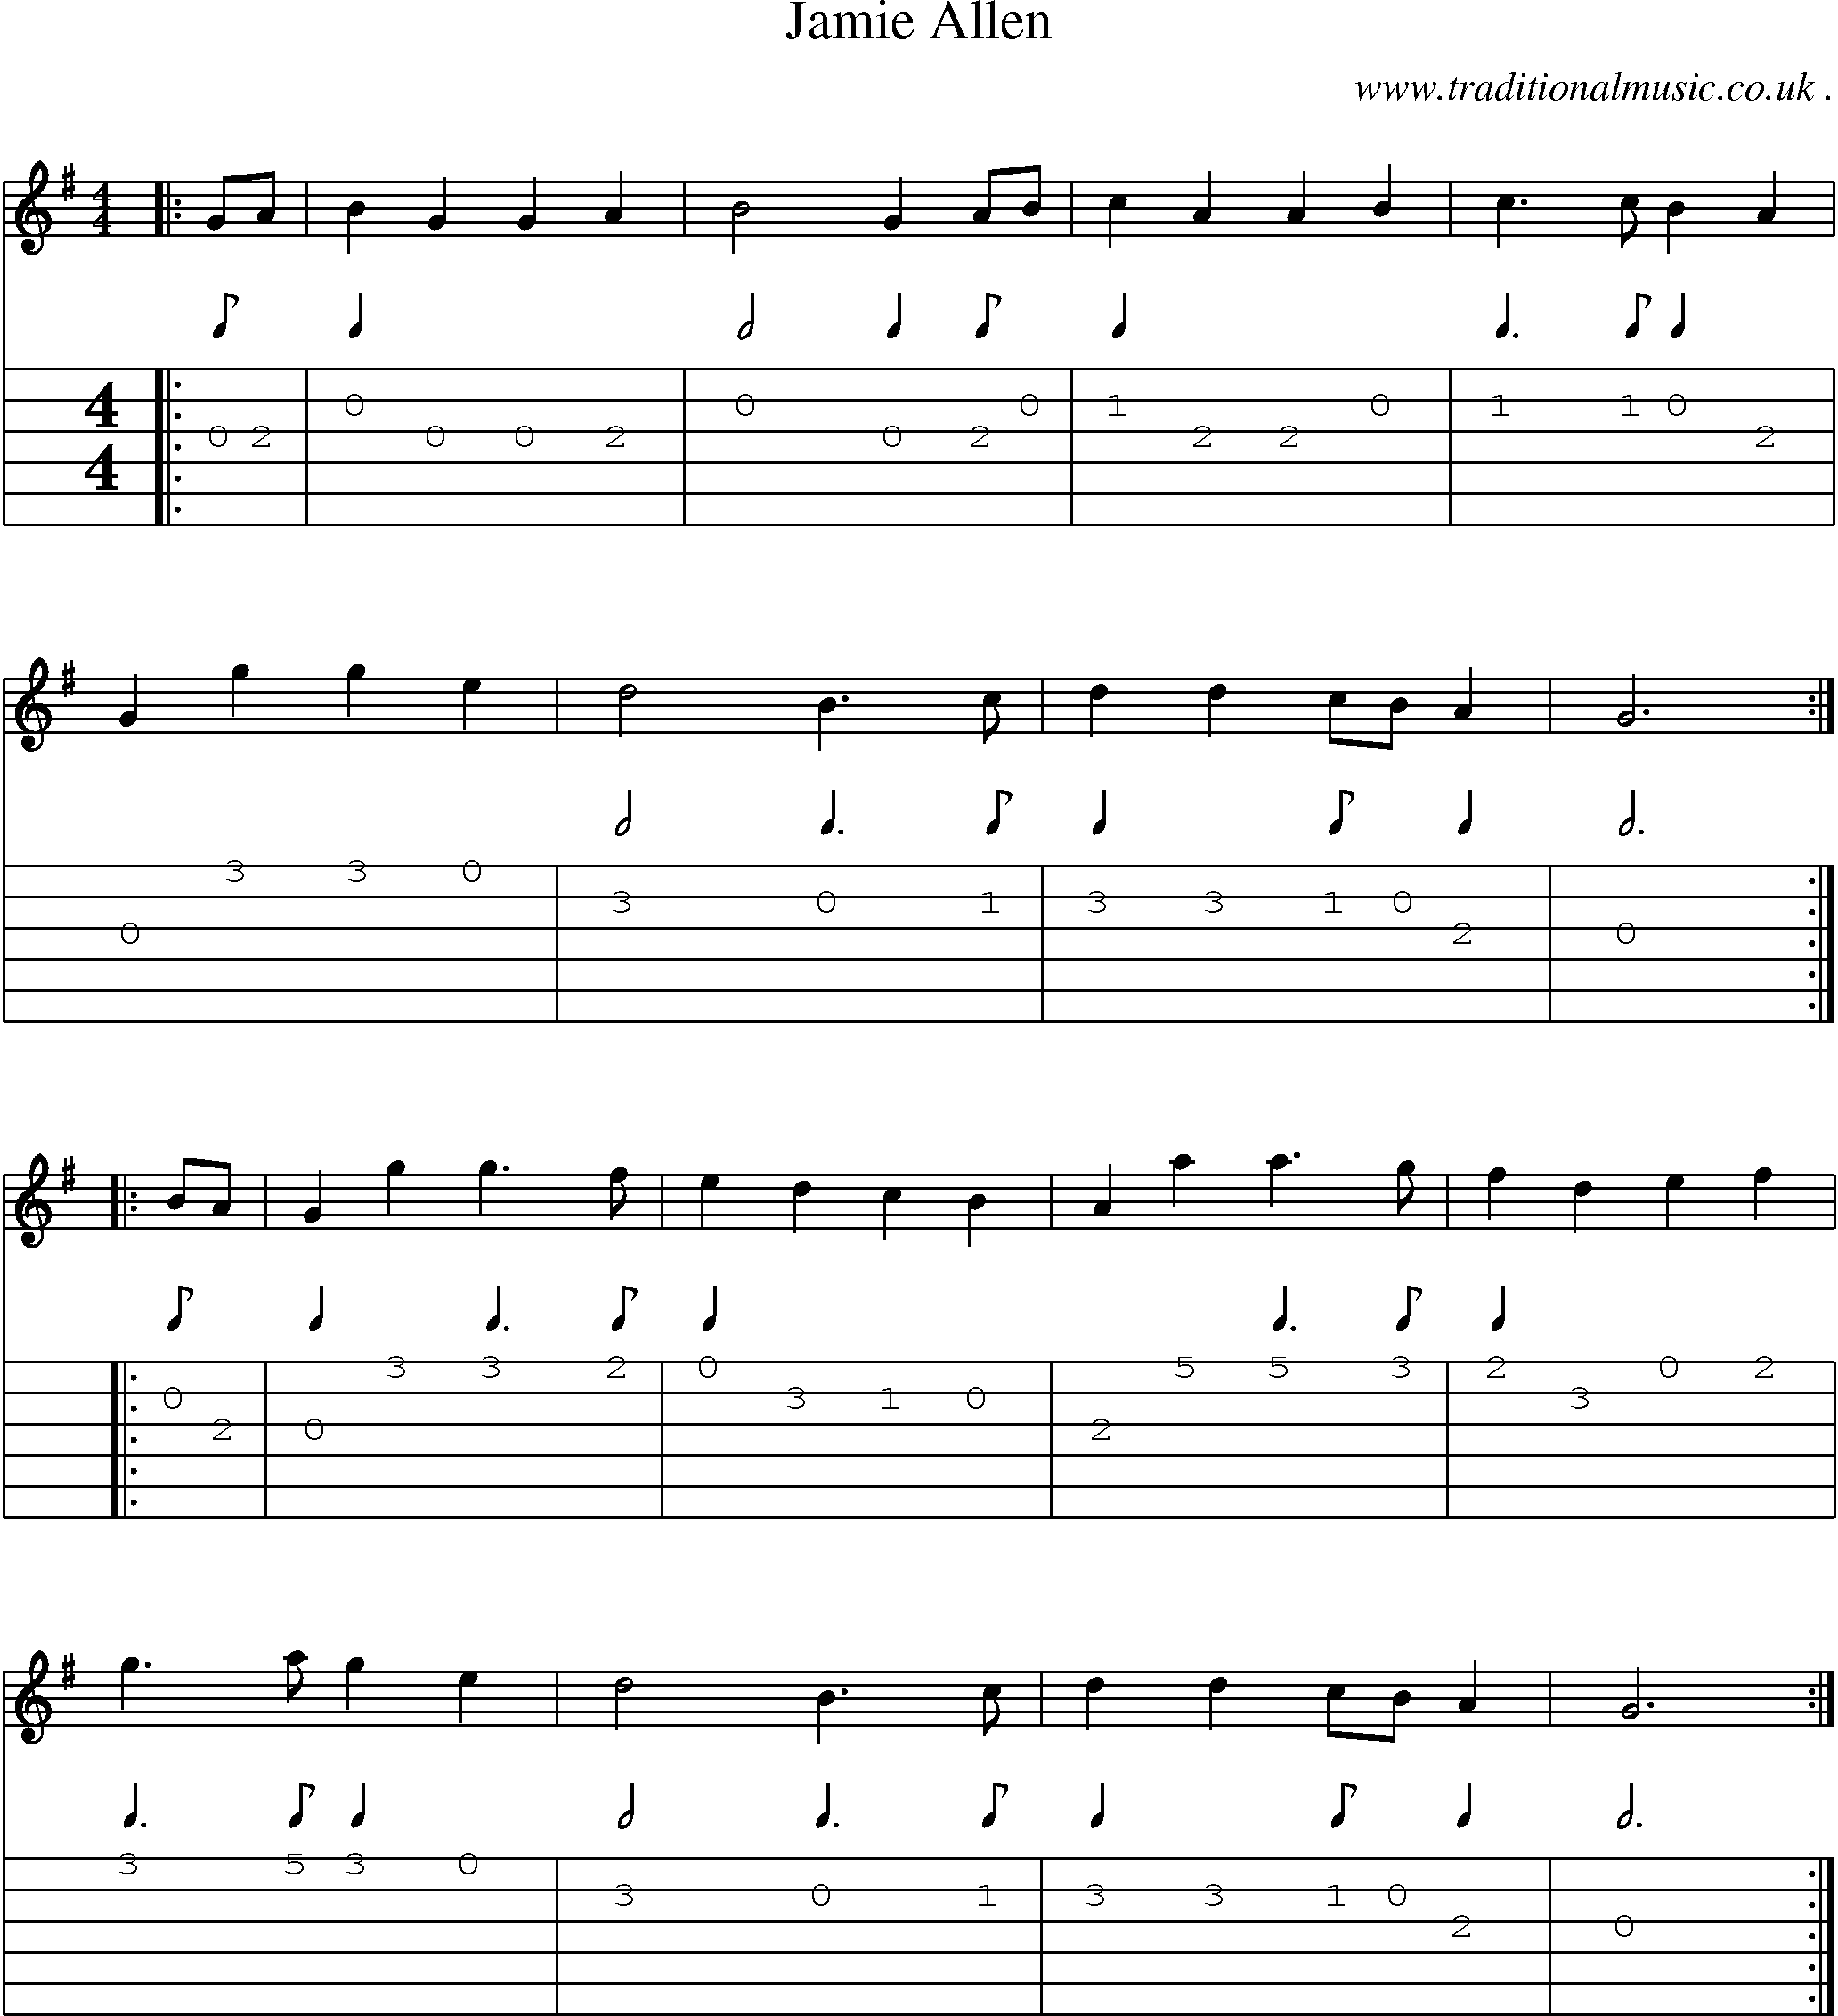 Sheet-Music and Guitar Tabs for Jamie Allen